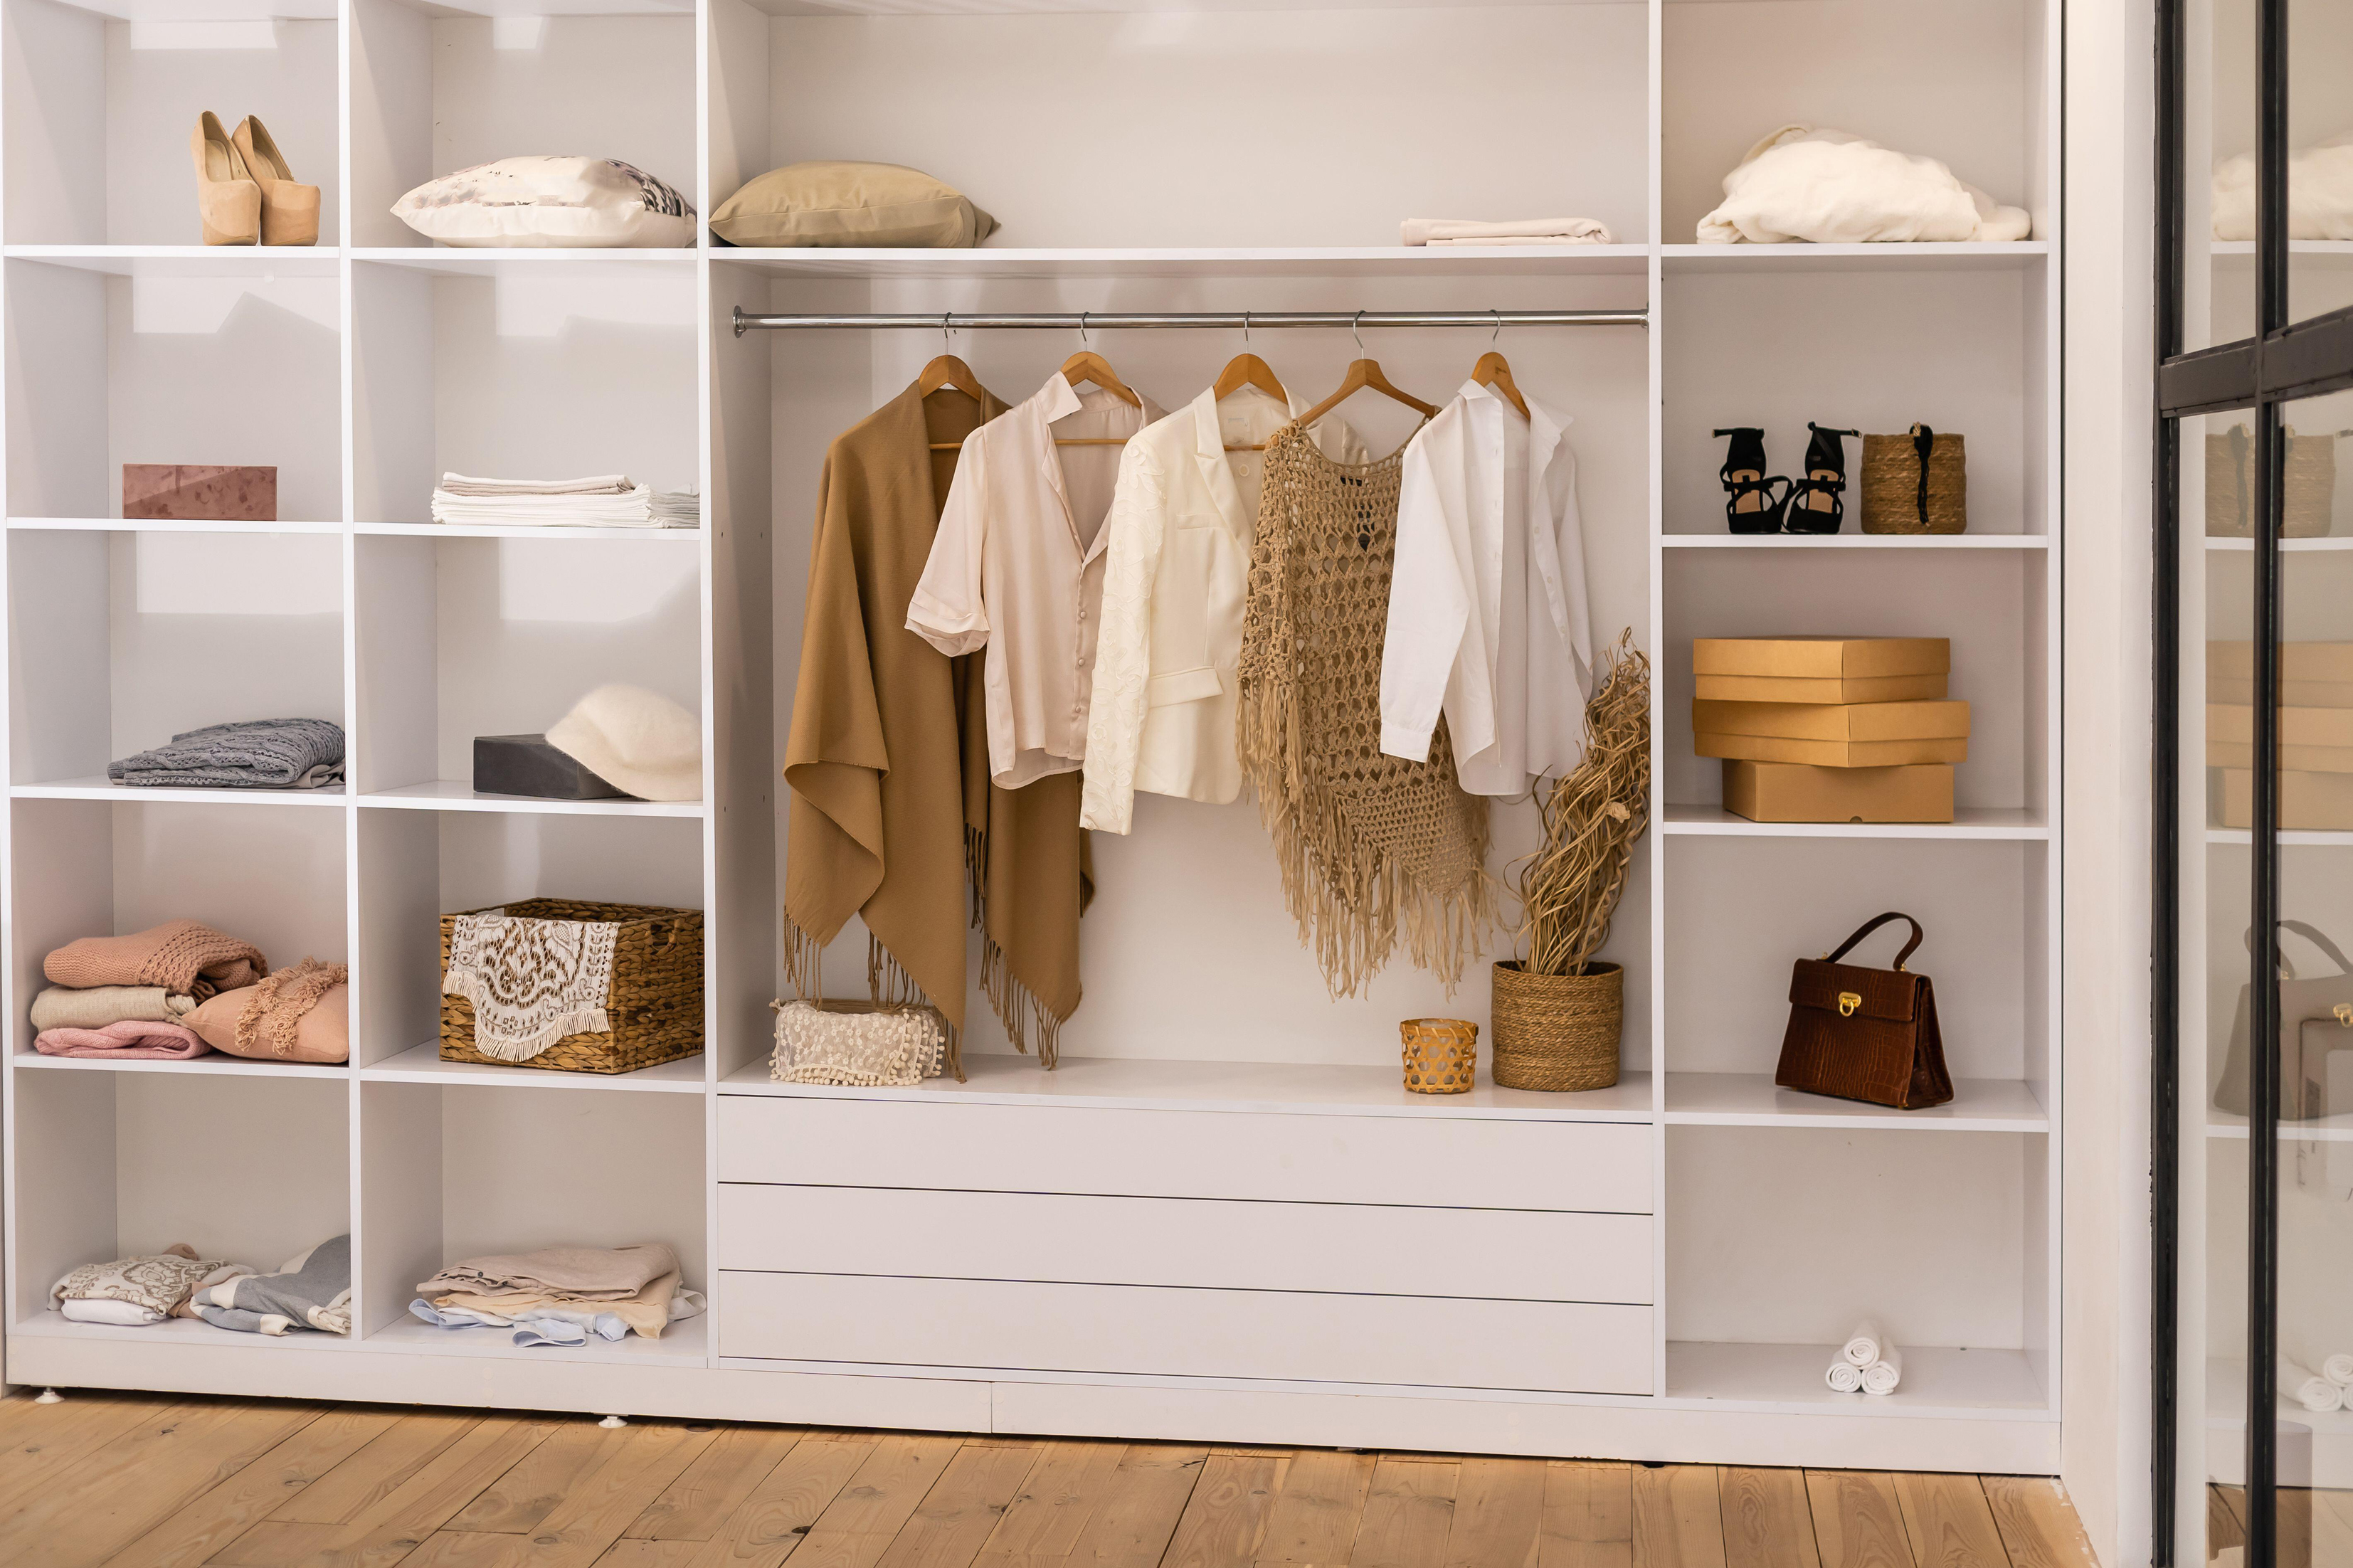 Tidy fitted wardrobe with ample storage and shelving